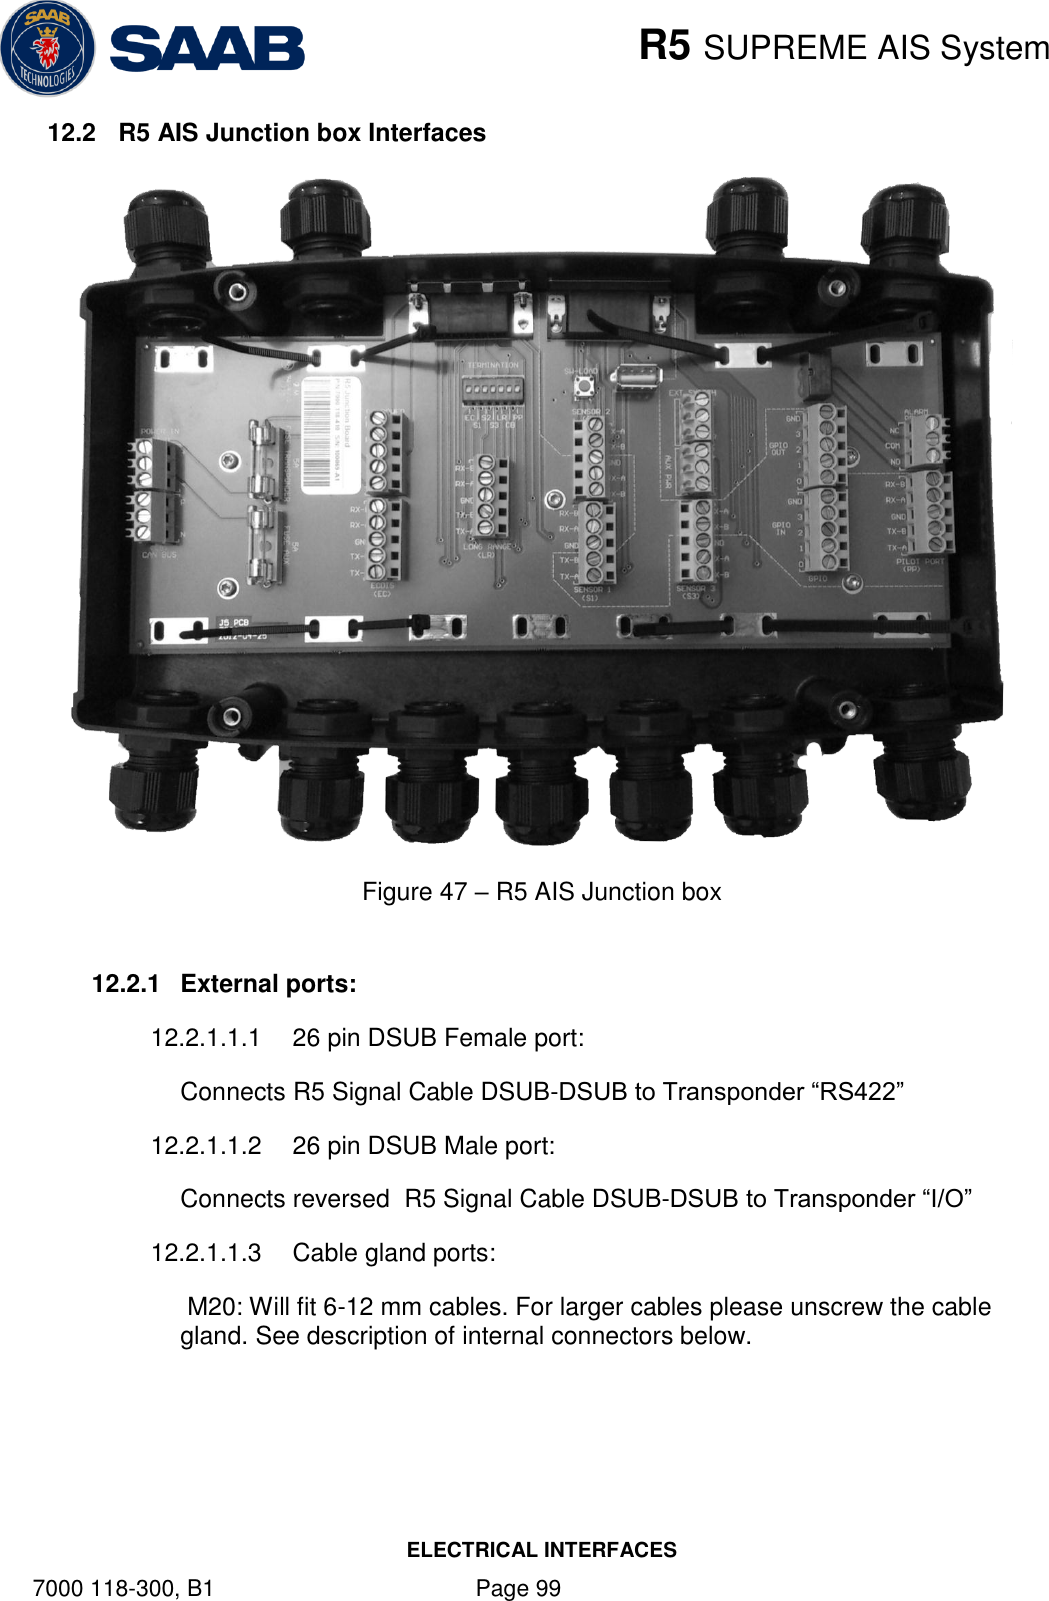    R5 SUPREME AIS System ELECTRICAL INTERFACES 7000 118-300, B1    Page 99 12.2  R5 AIS Junction box Interfaces  Figure 47 – R5 AIS Junction box  12.2.1  External ports: 12.2.1.1.1  26 pin DSUB Female port:  Connects R5 Signal Cable DSUB-DSUB to Transponder “RS422” 12.2.1.1.2  26 pin DSUB Male port: Connects reversed  R5 Signal Cable DSUB-DSUB to Transponder “I/O” 12.2.1.1.3  Cable gland ports:  M20: Will fit 6-12 mm cables. For larger cables please unscrew the cable gland. See description of internal connectors below.   